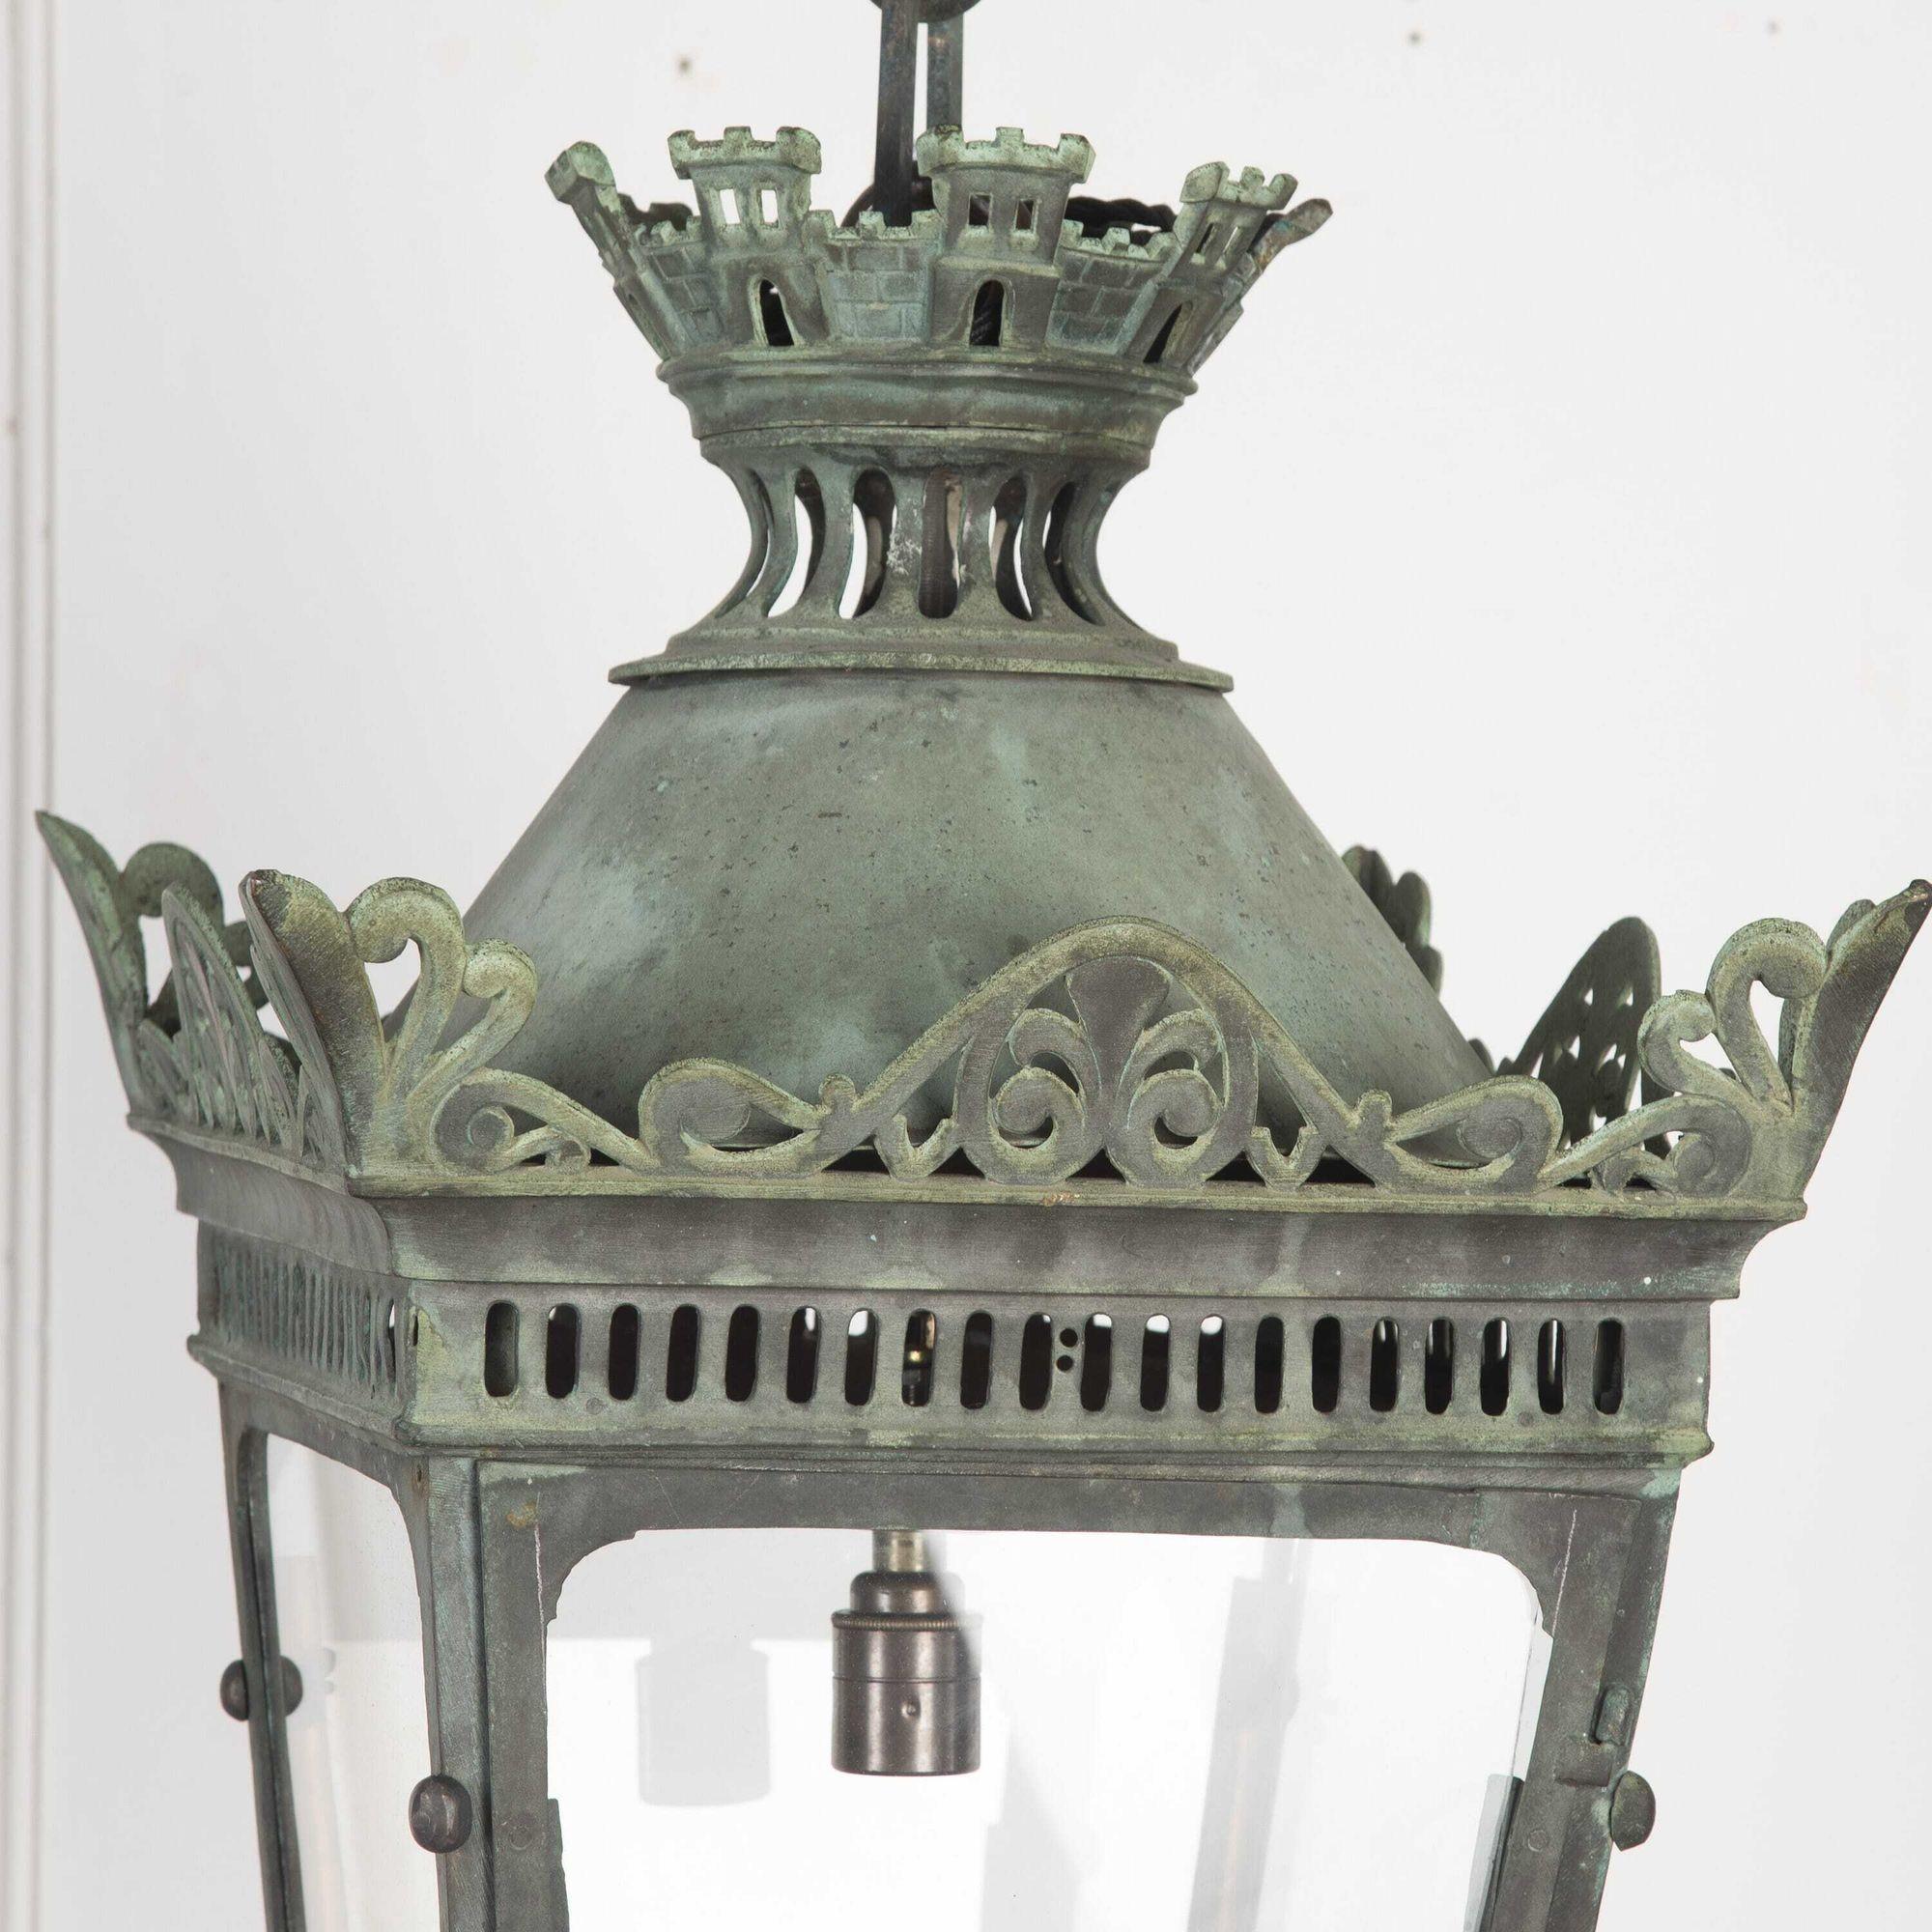 Fantastic Late 19th Century French verdigris copper hanging lantern with chain.
This is a fabulous fully glazed verdigris copper lantern featuring a beautiful-pierced frame with a turret top with a hexagonal link chain that compliments the lantern